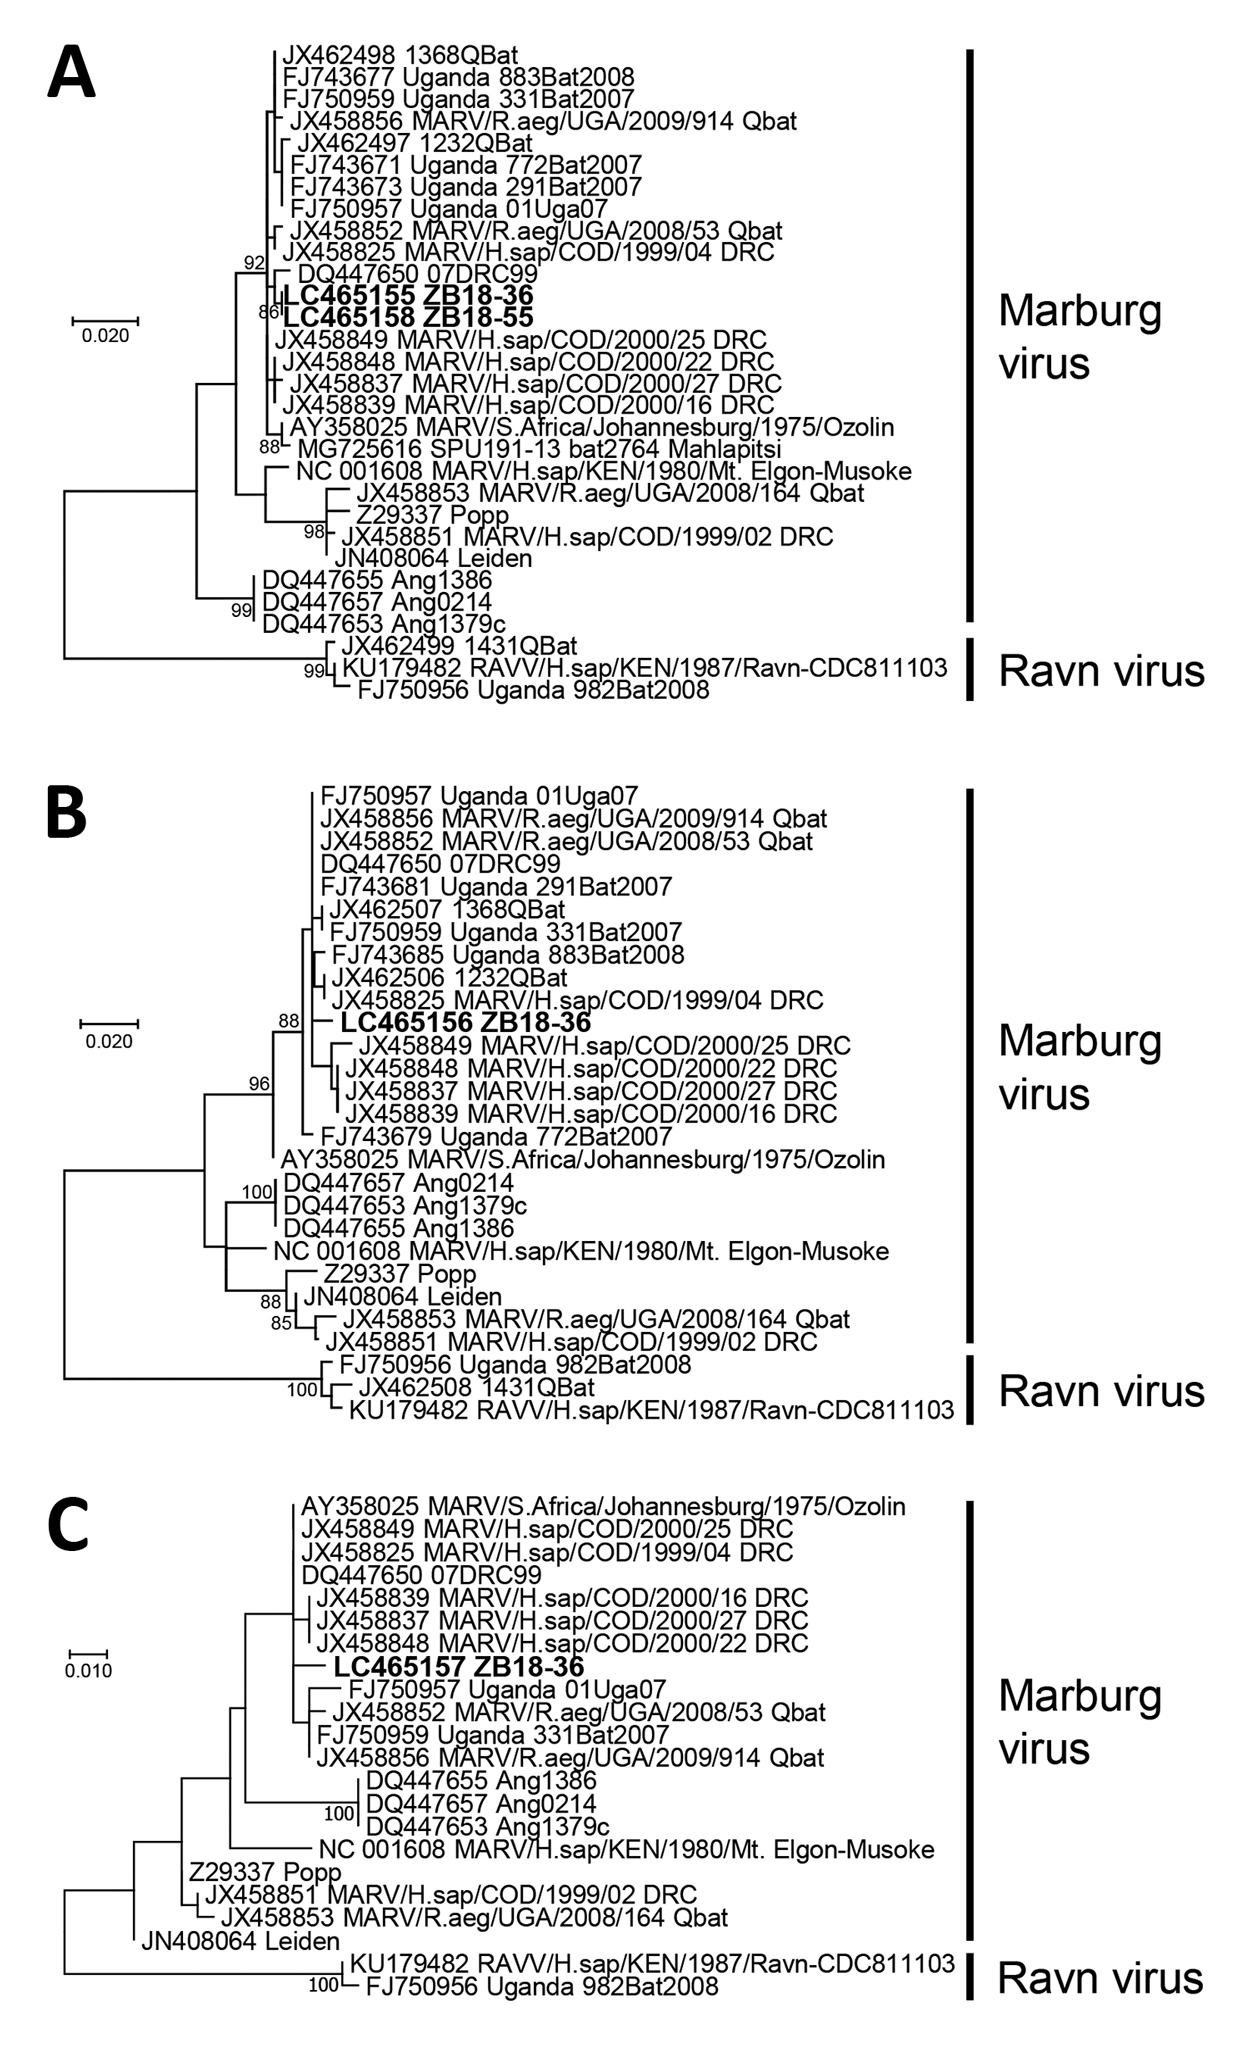 Phylogenetic trees showing evolutionary relationships of Marburgviruses from Egyptian fruit bats (Rousettus aegyptiacus), Zambia, 2018 (boldface), and reference viruses. The trees were constructed based on nucleotide sequences of 440 nt for the nucleoprotein gene (A), 296 nt for the viral protein 35 gene (B), and 238 nt for the RNA-dependent RNA polymerase gene (C) by using the maximum-likelihood method in MEGA7 (11). Nucleotide sequences of representative Marburgvirus strains were obtained from